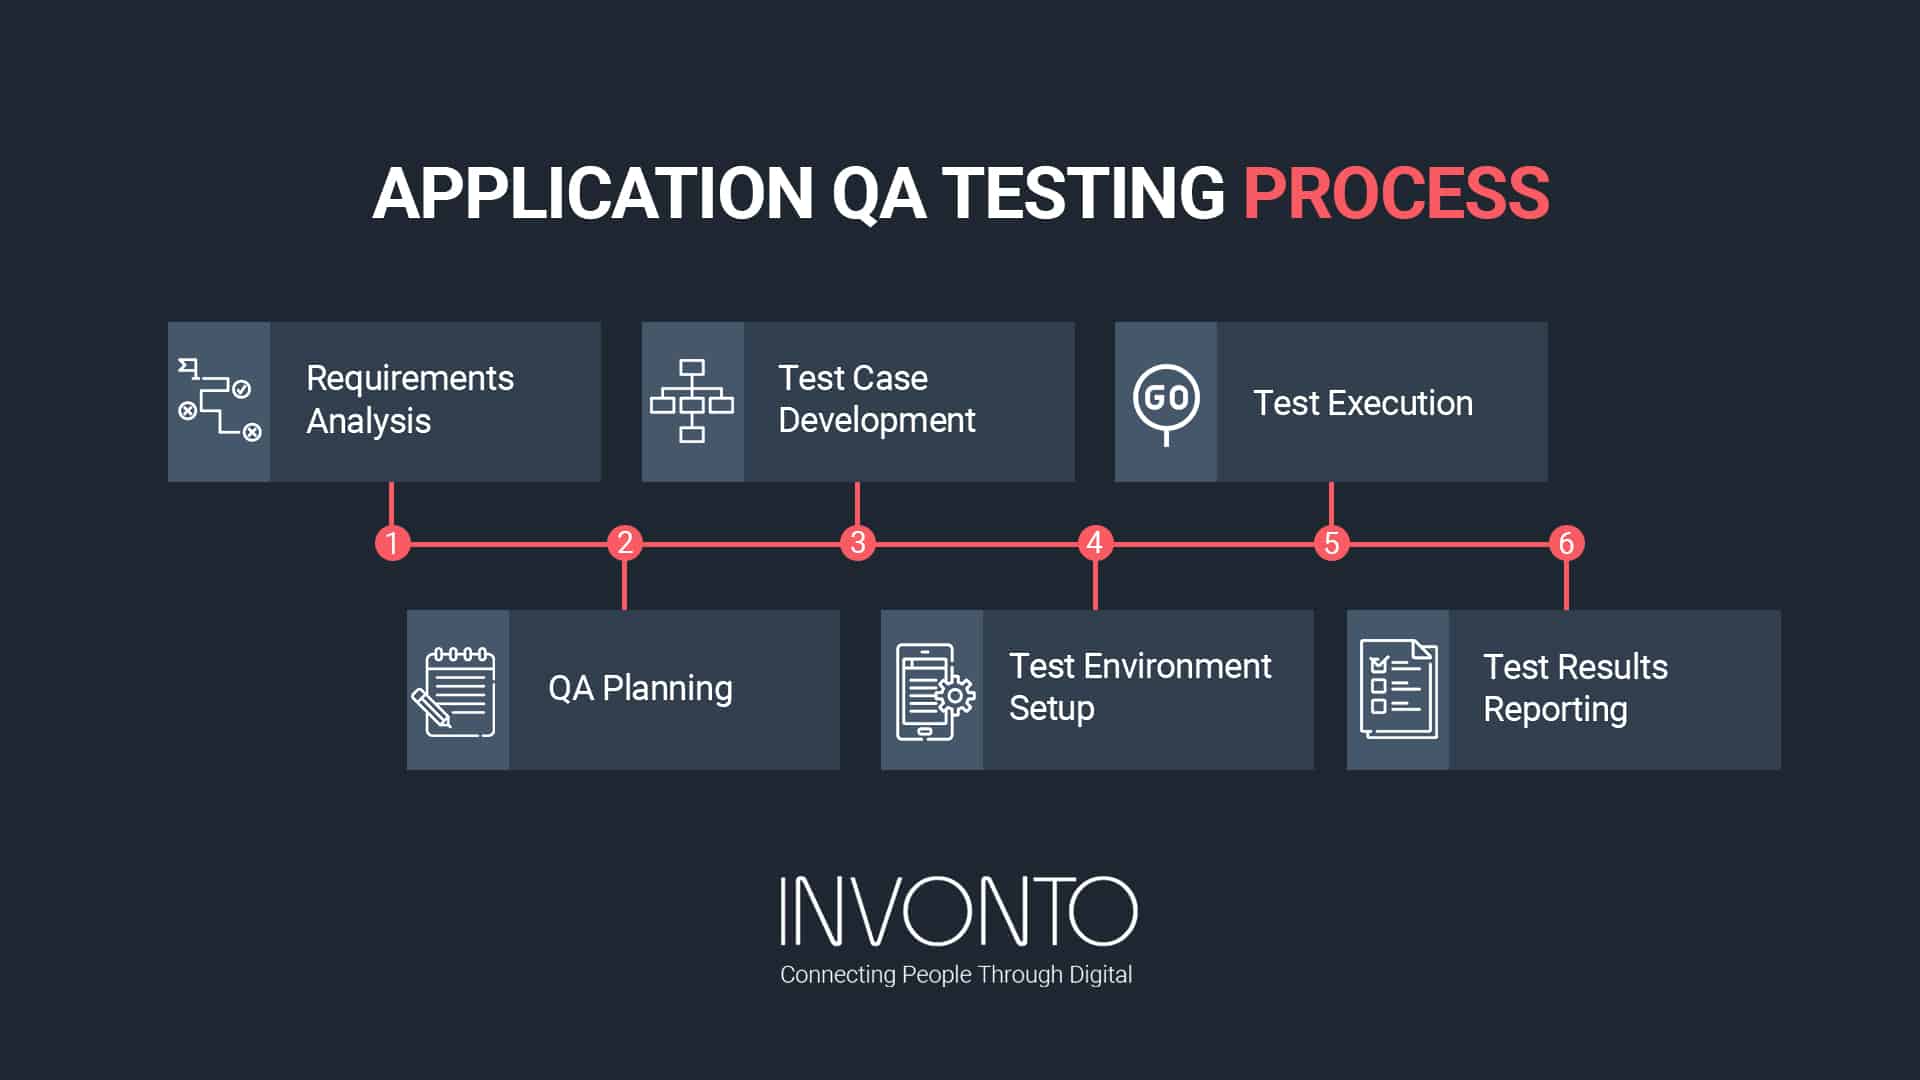 Requirements for Web Testing